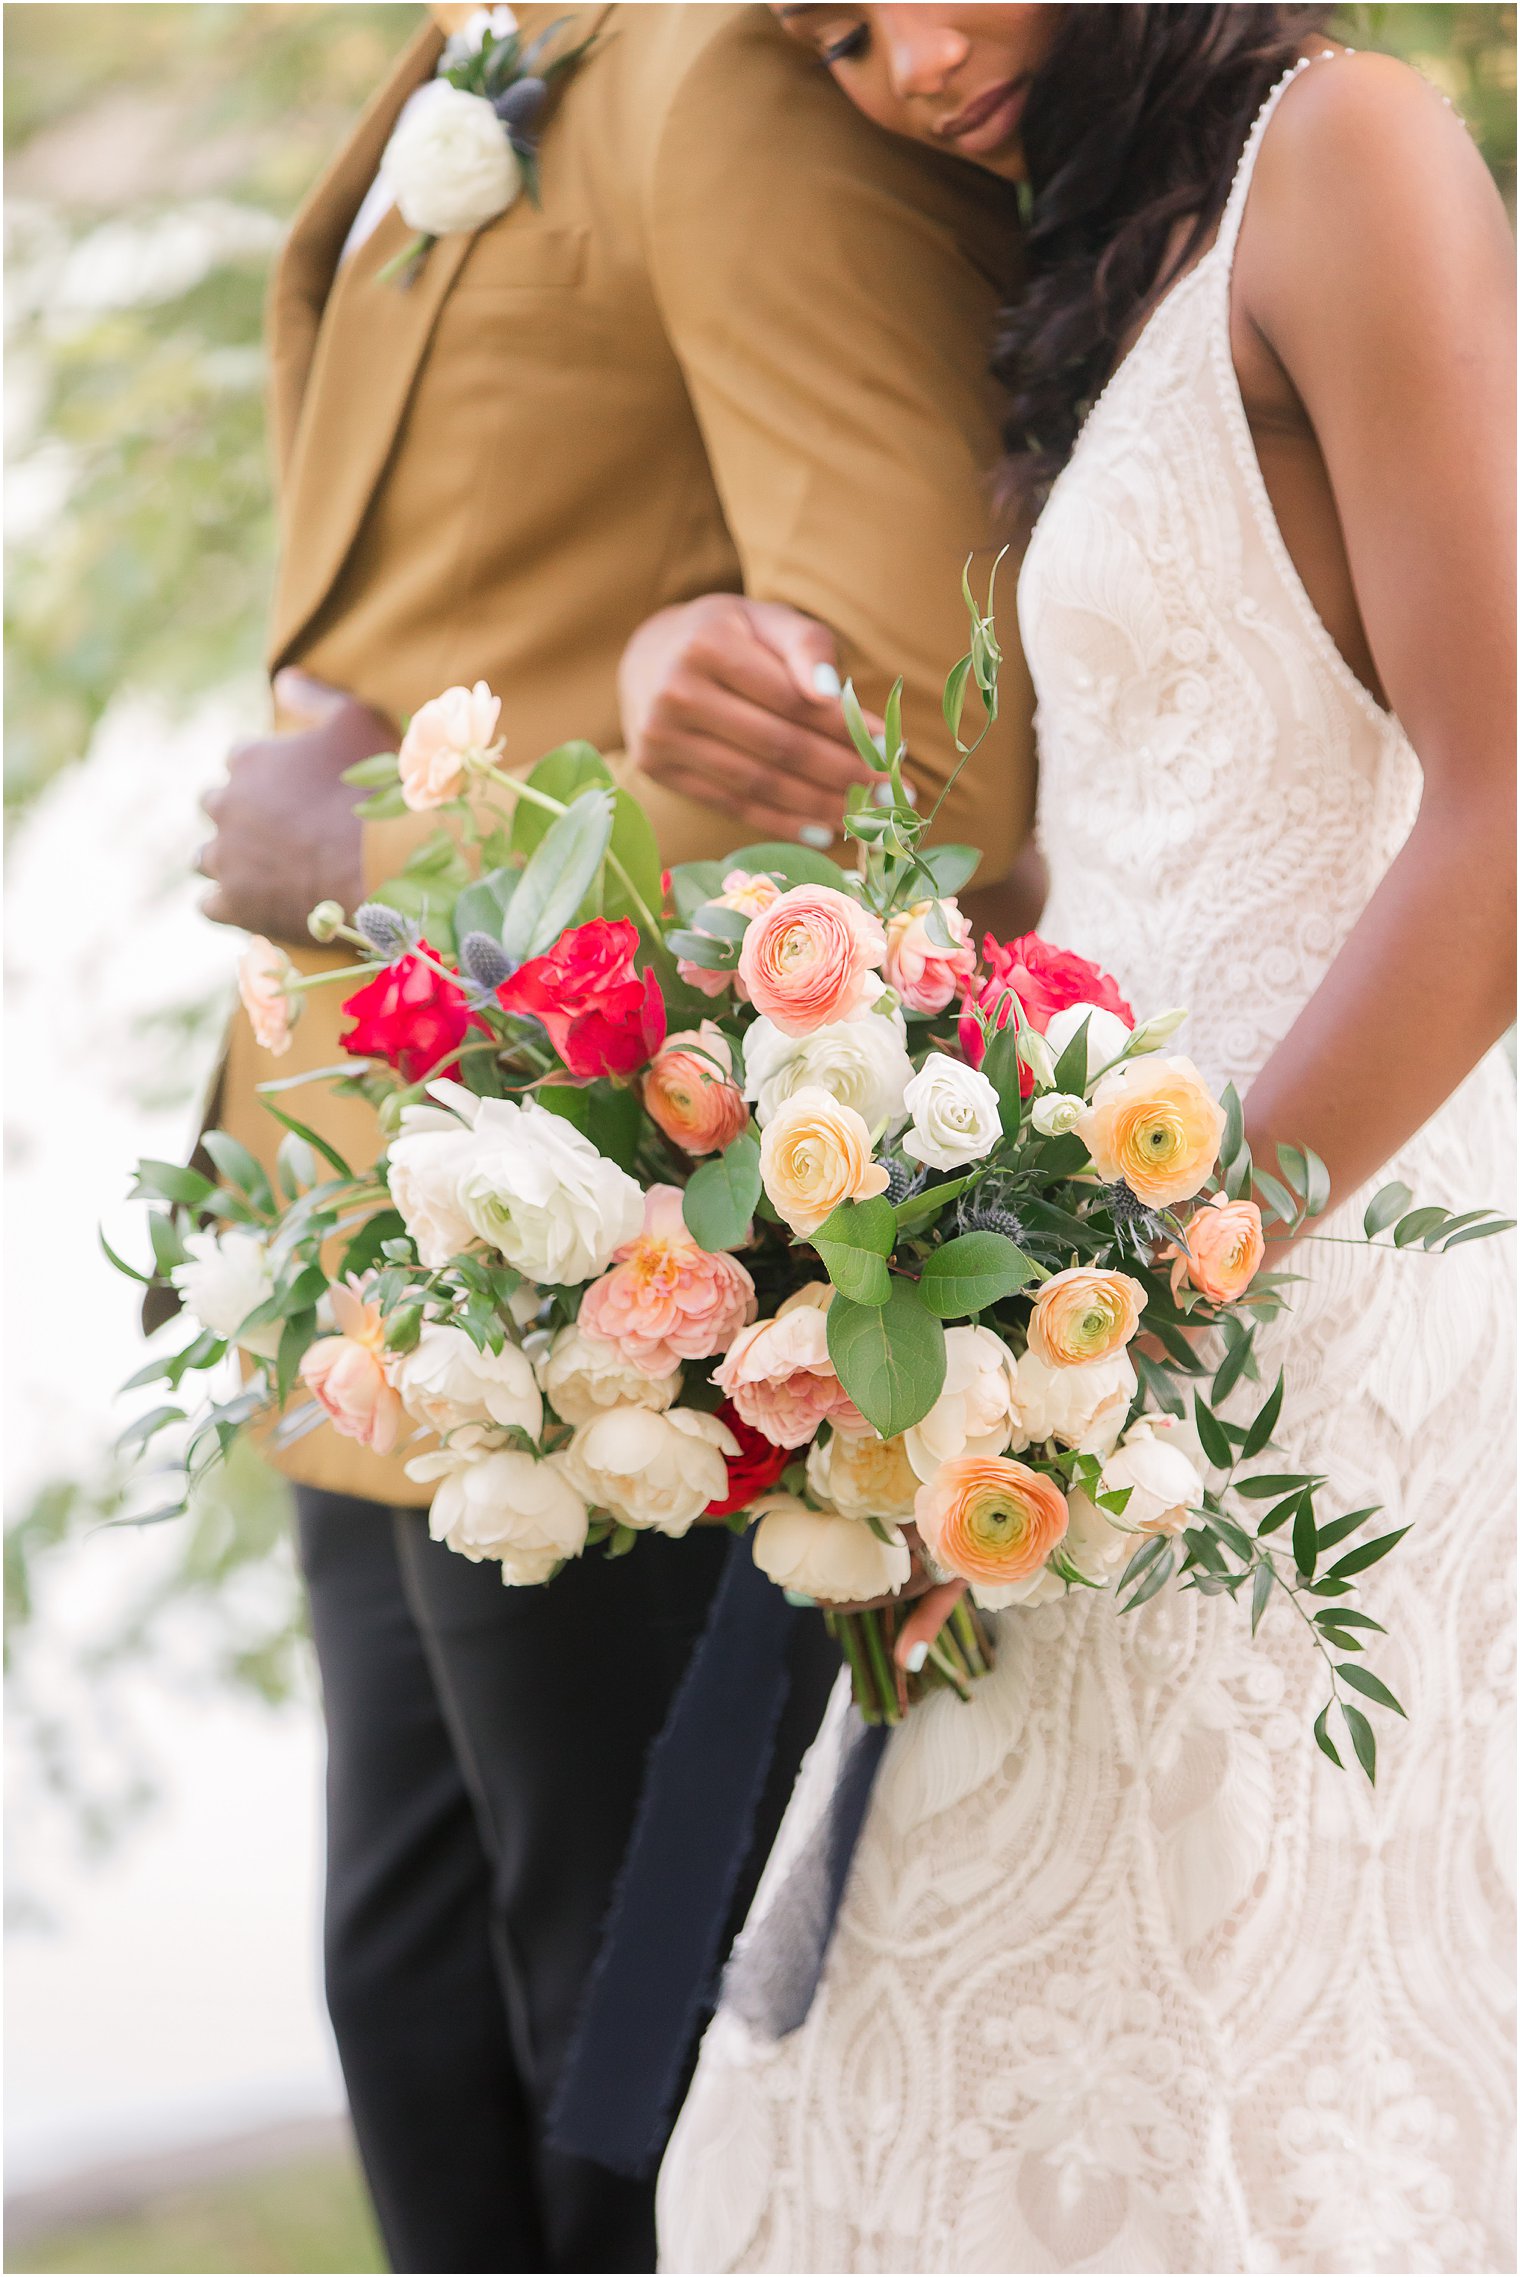 modern fall wedding bouquet inspiration with pinks, ivory, and orange